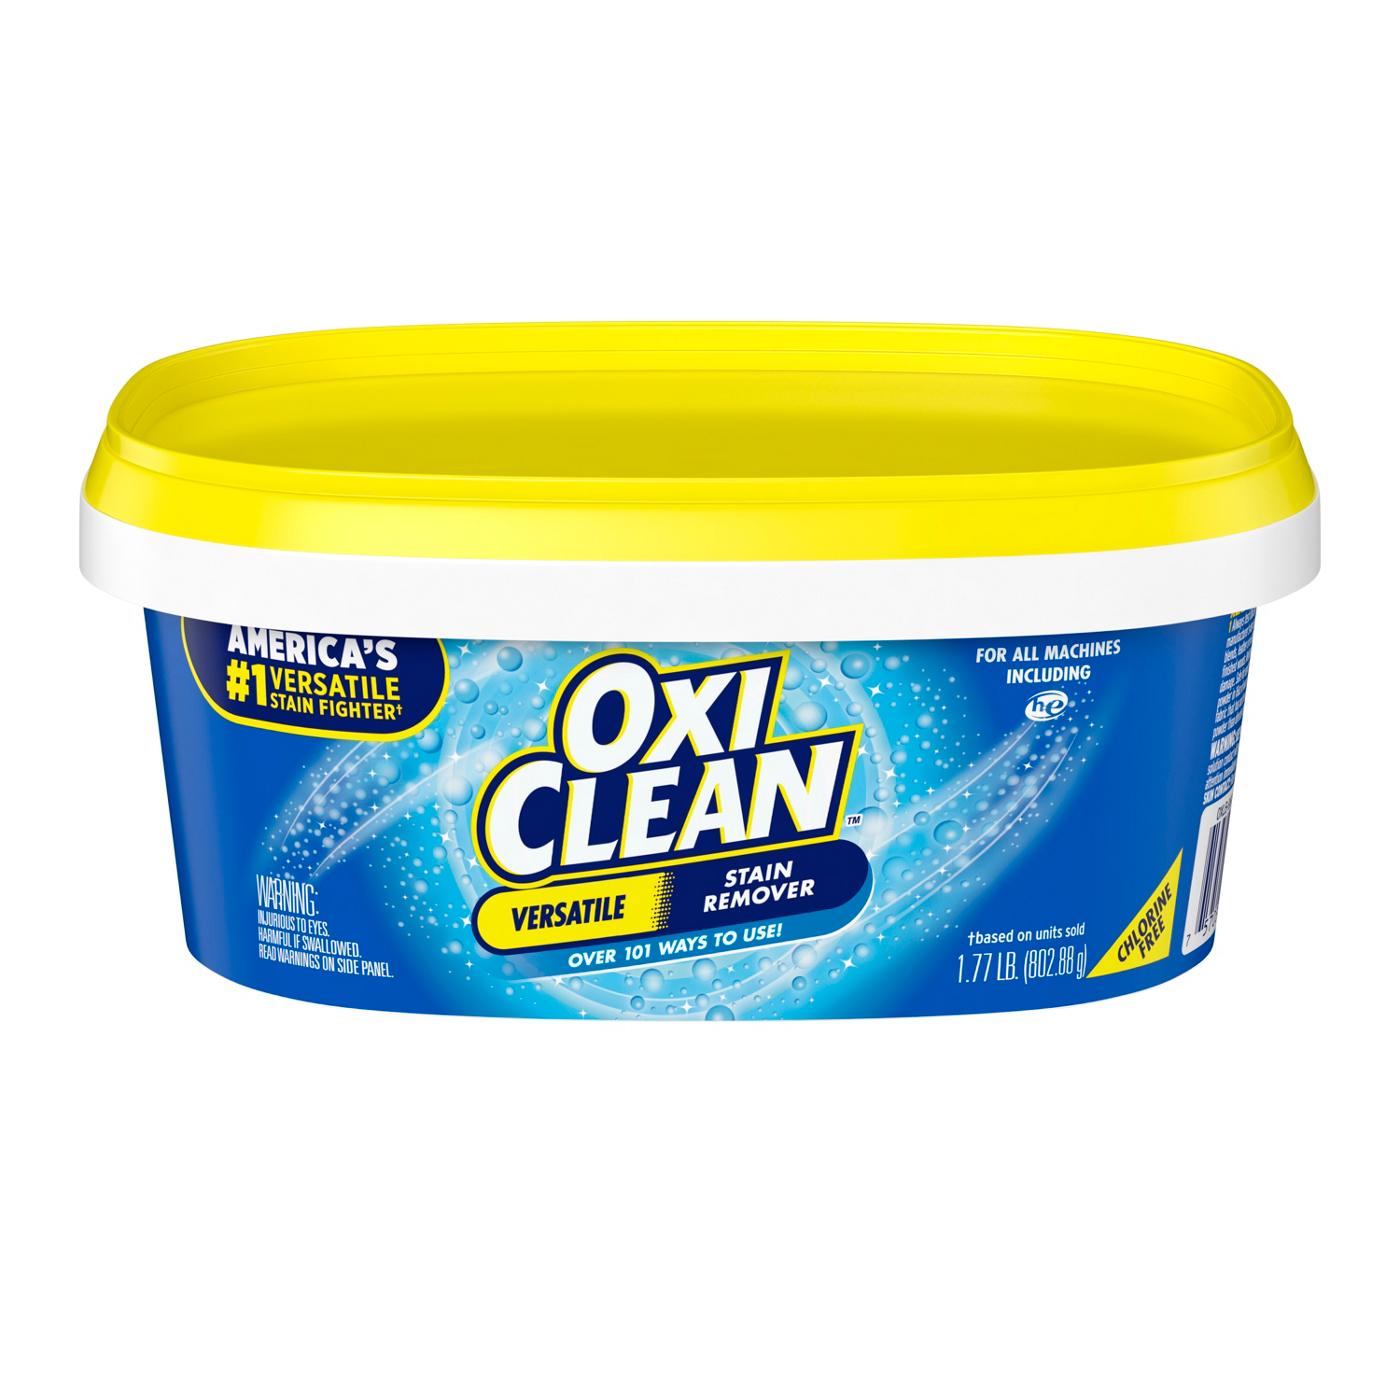 OxiClean Versatile Stain Remover; image 1 of 3